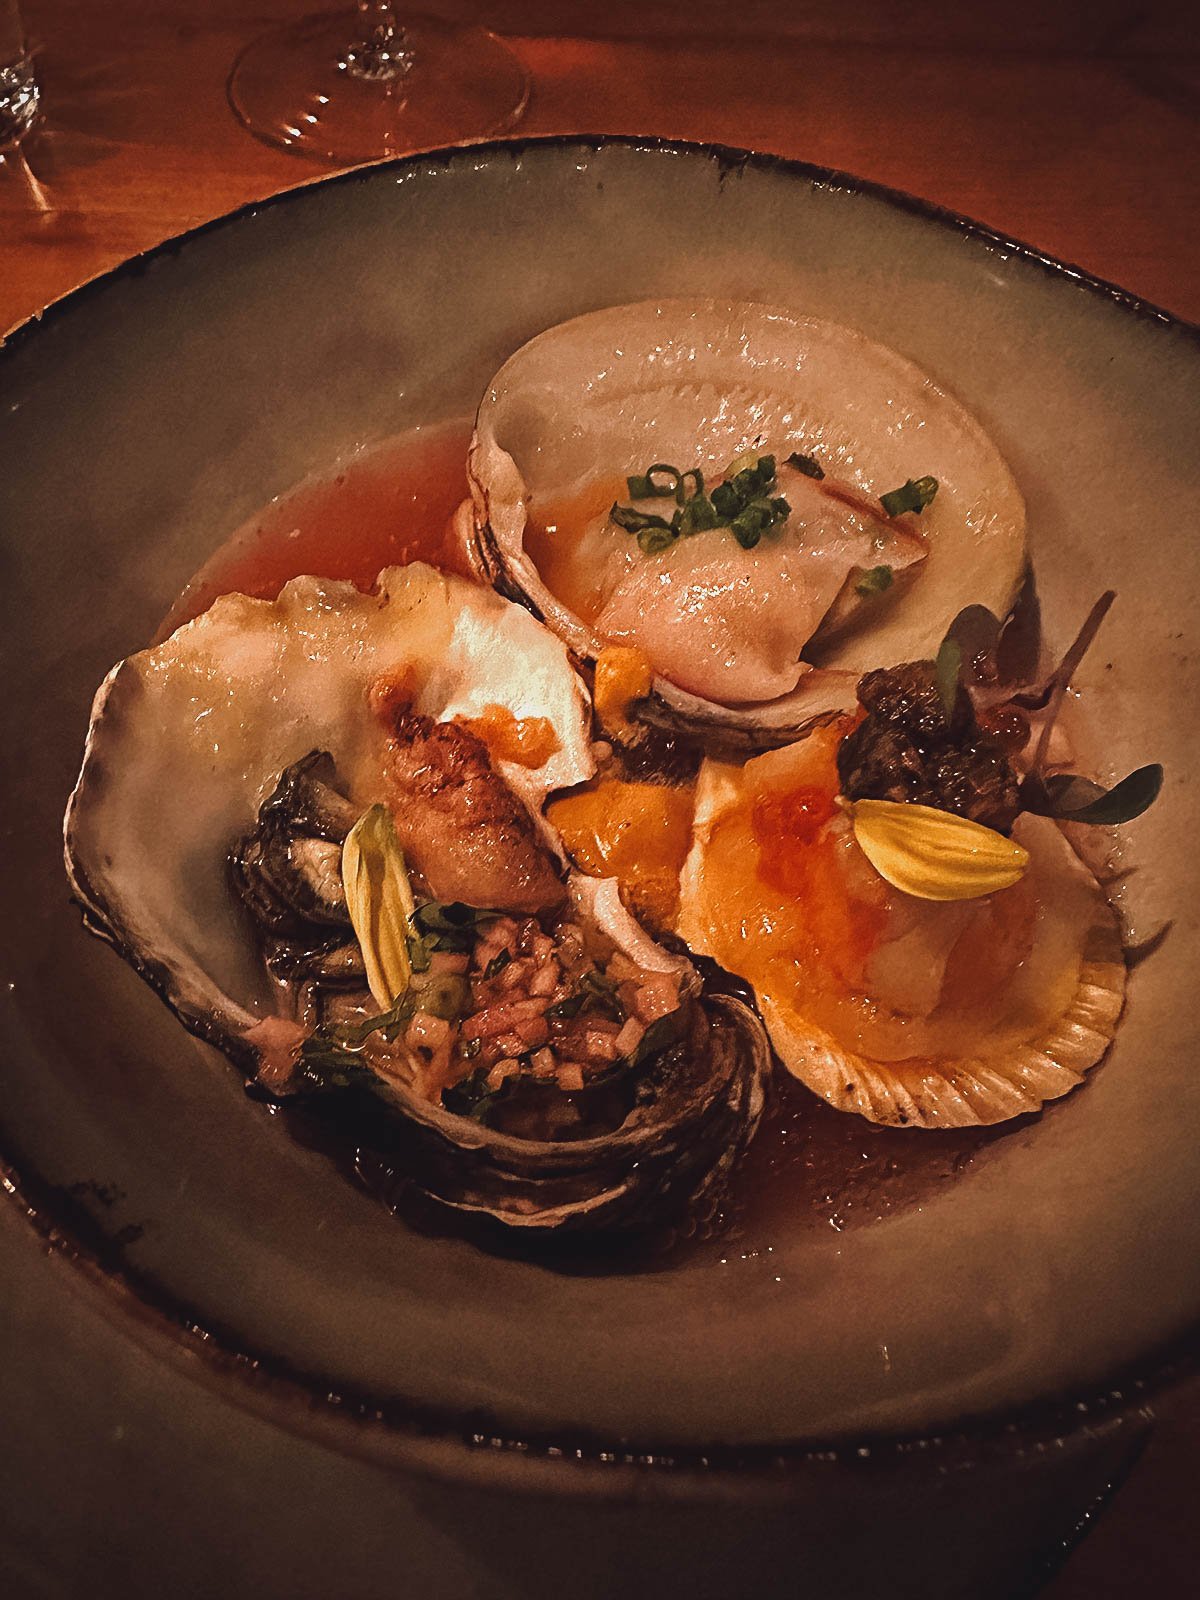 Oysters, live giant clams, and Hokkaido scallop